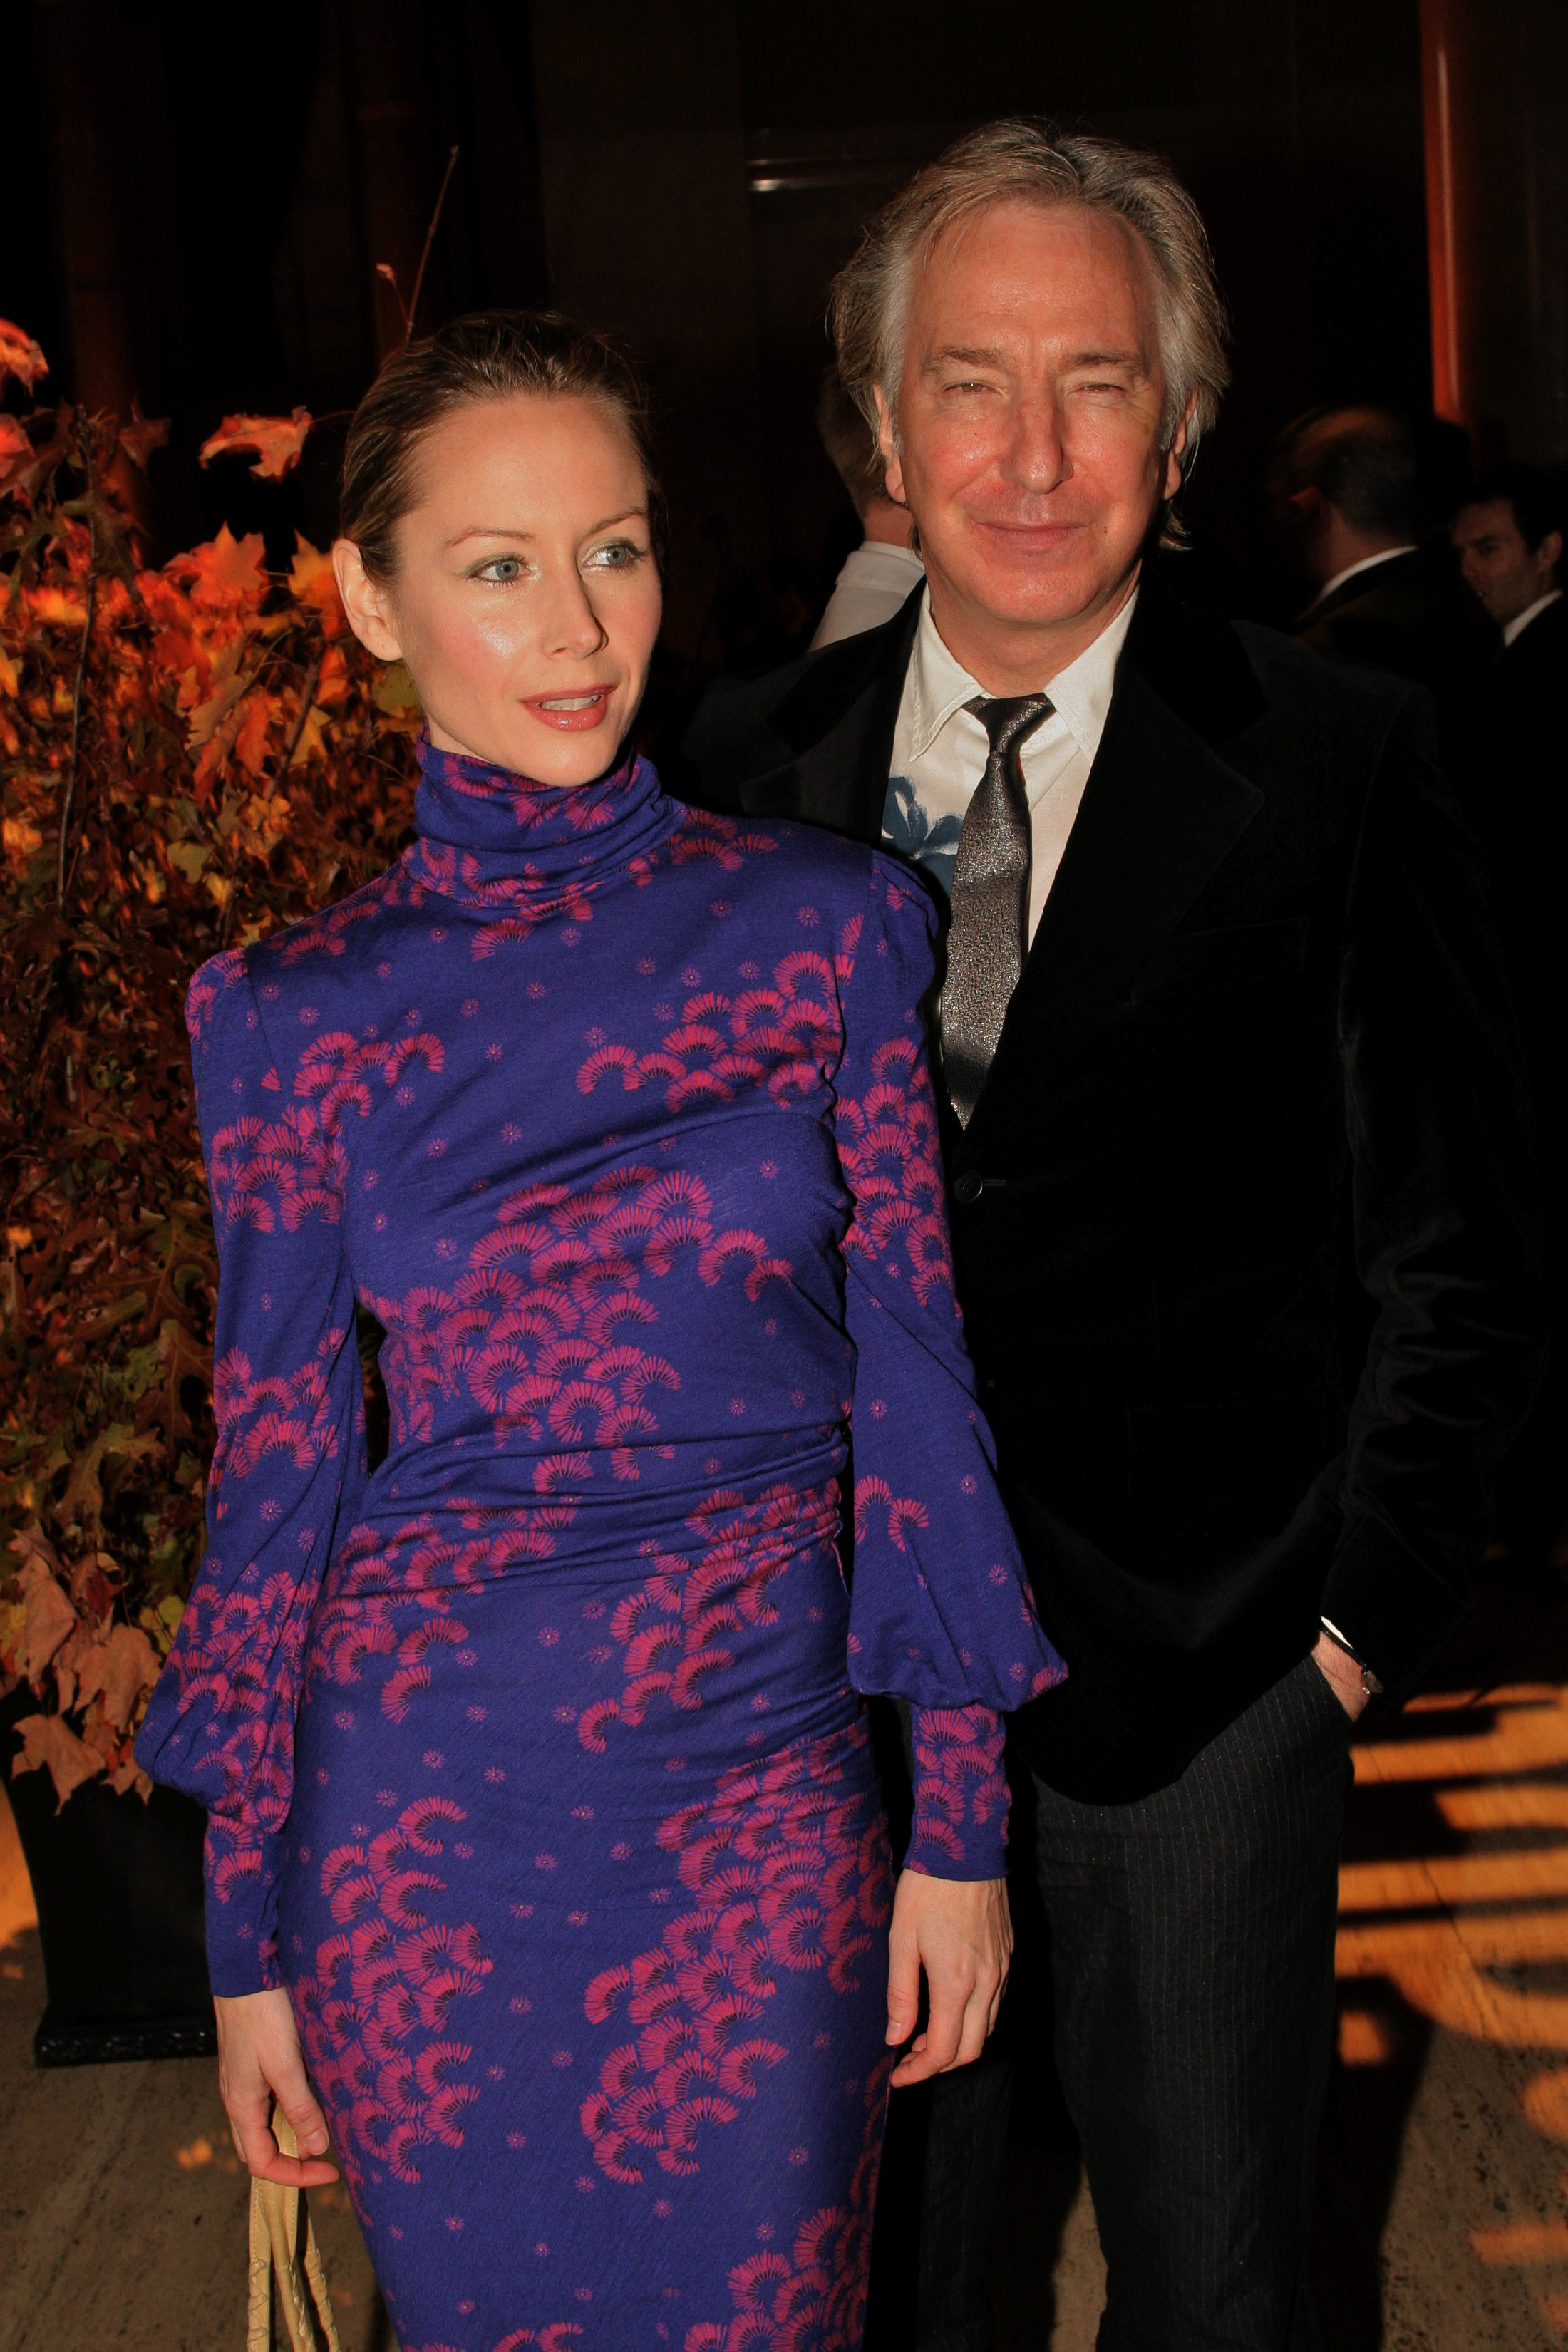 Megan Dodds and Alan Rickman attend The Acting Company's Annual Masquerade Costume Ball